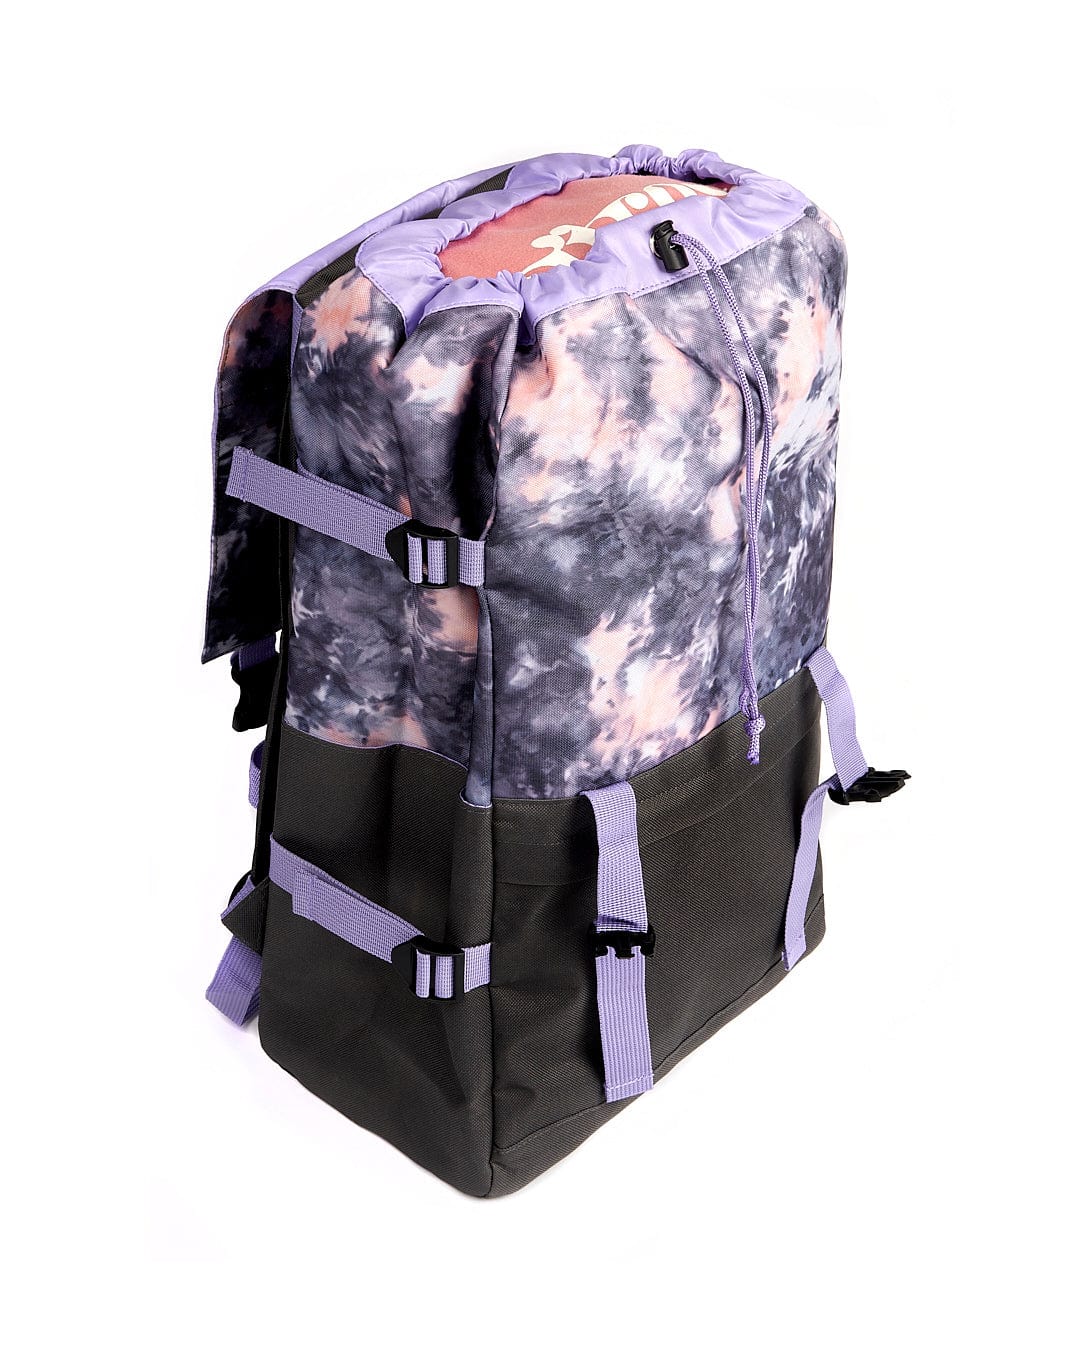 A Saltrock backpack with a Top Loader - Backpack - Pink/purple tie dye pattern.